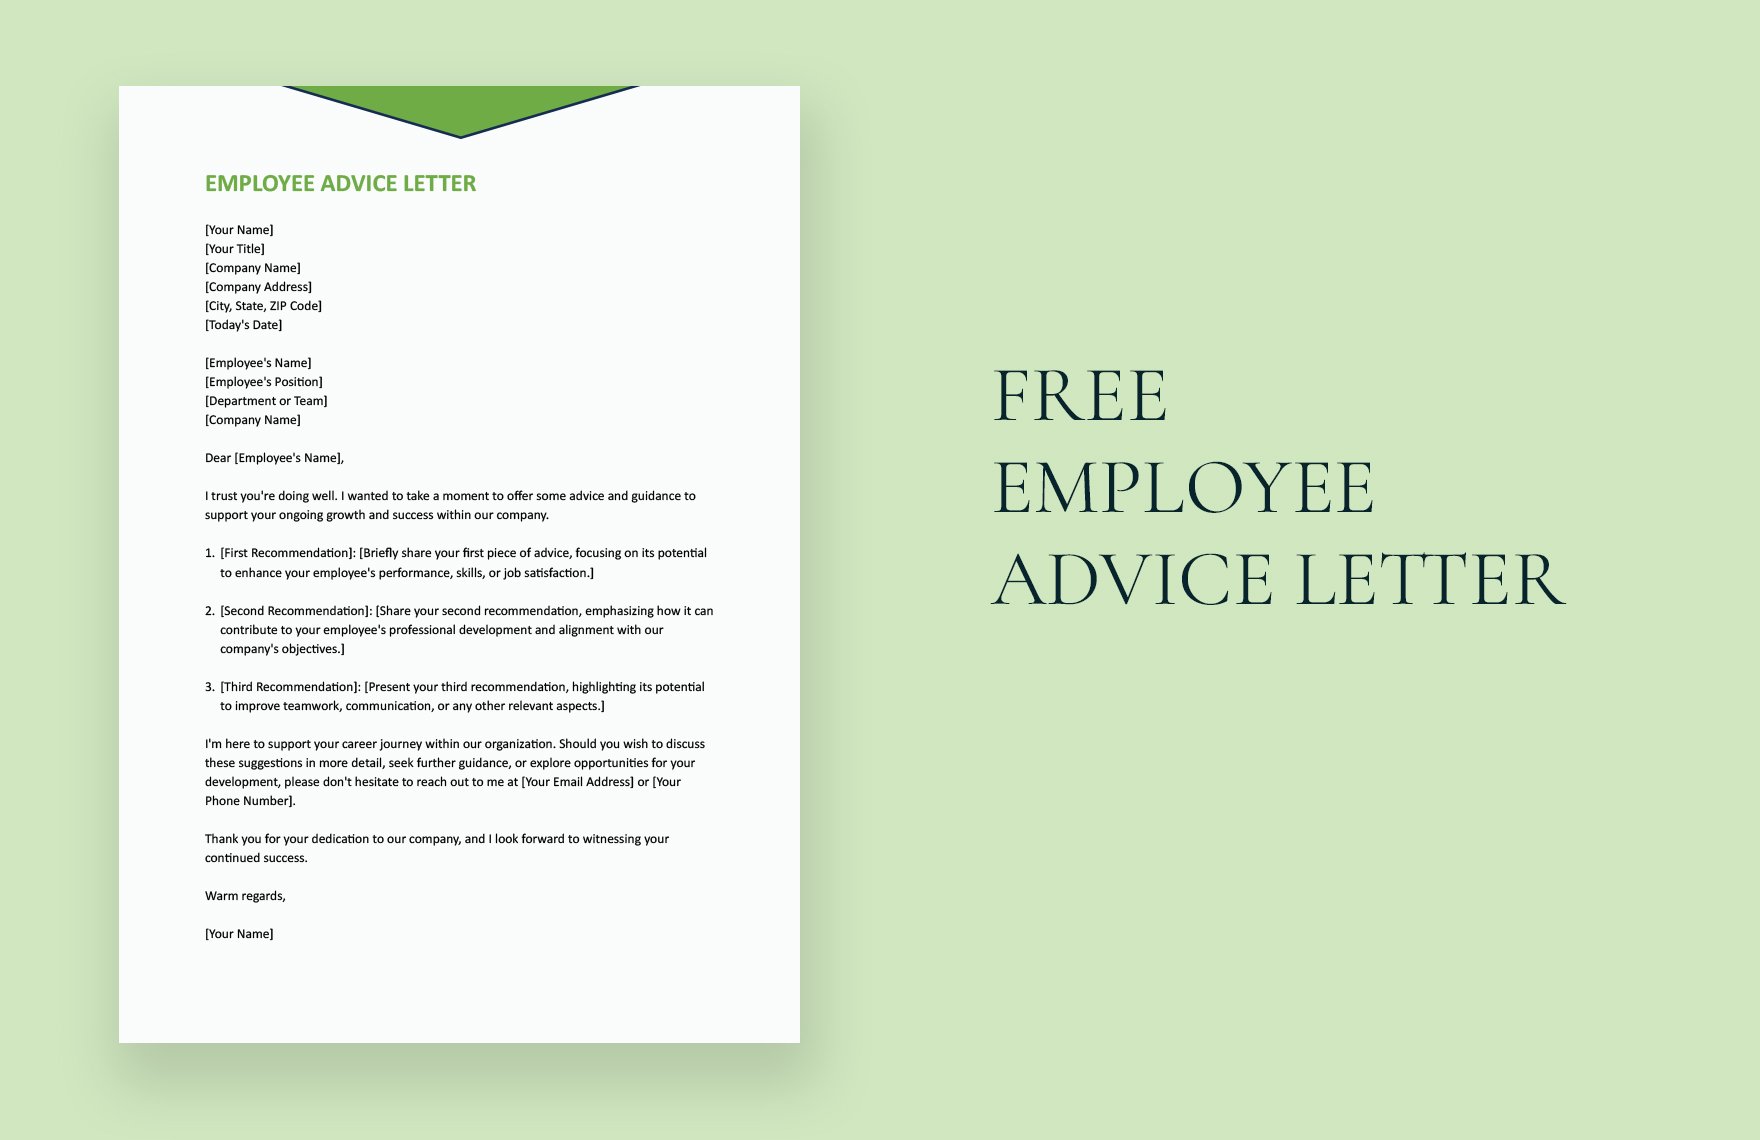 Employee Advice Letter in Word, Google Docs